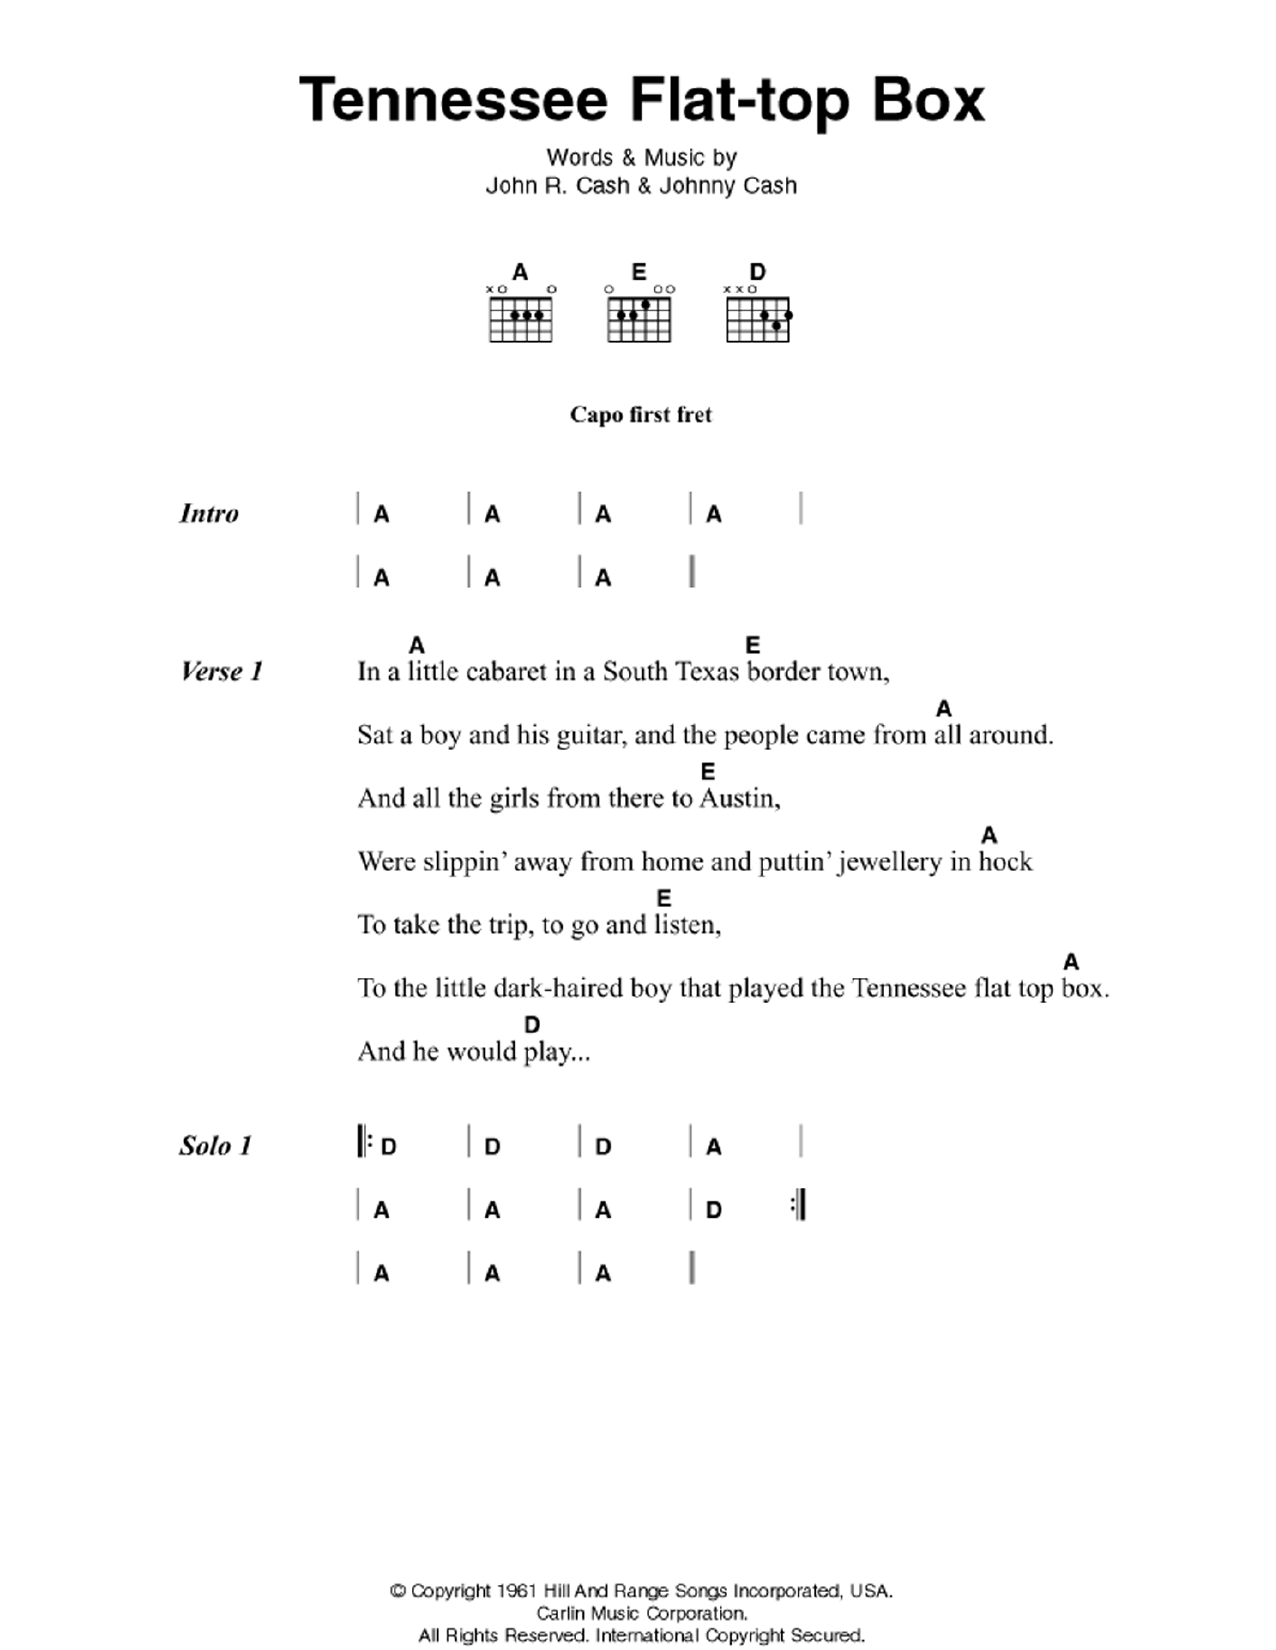 Download Johnny Cash Tennessee Flat-top Box Sheet Music